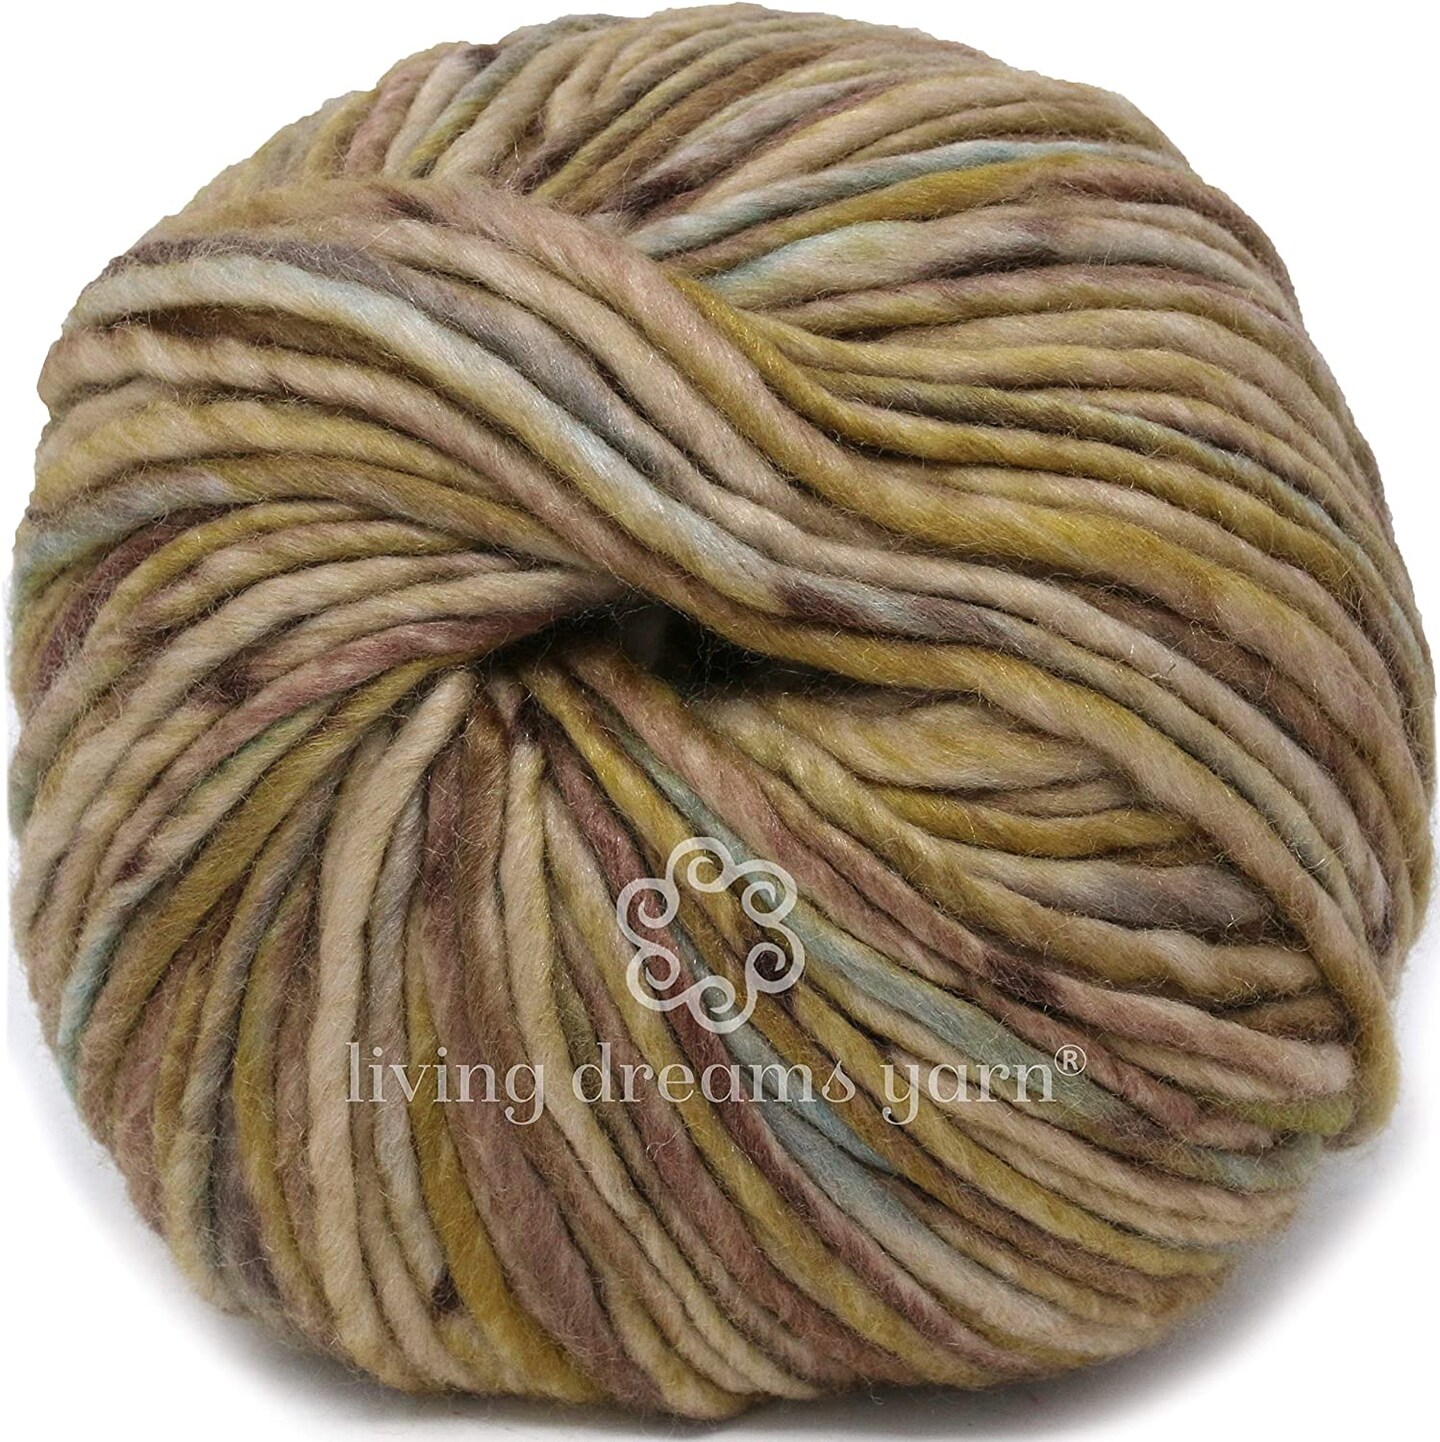 BAE: 100% Extrafine Merino Wool Bulky Weight Roving Yarn. Cuddly, Strong & Super Soft for Next to Skin Winter Knits.